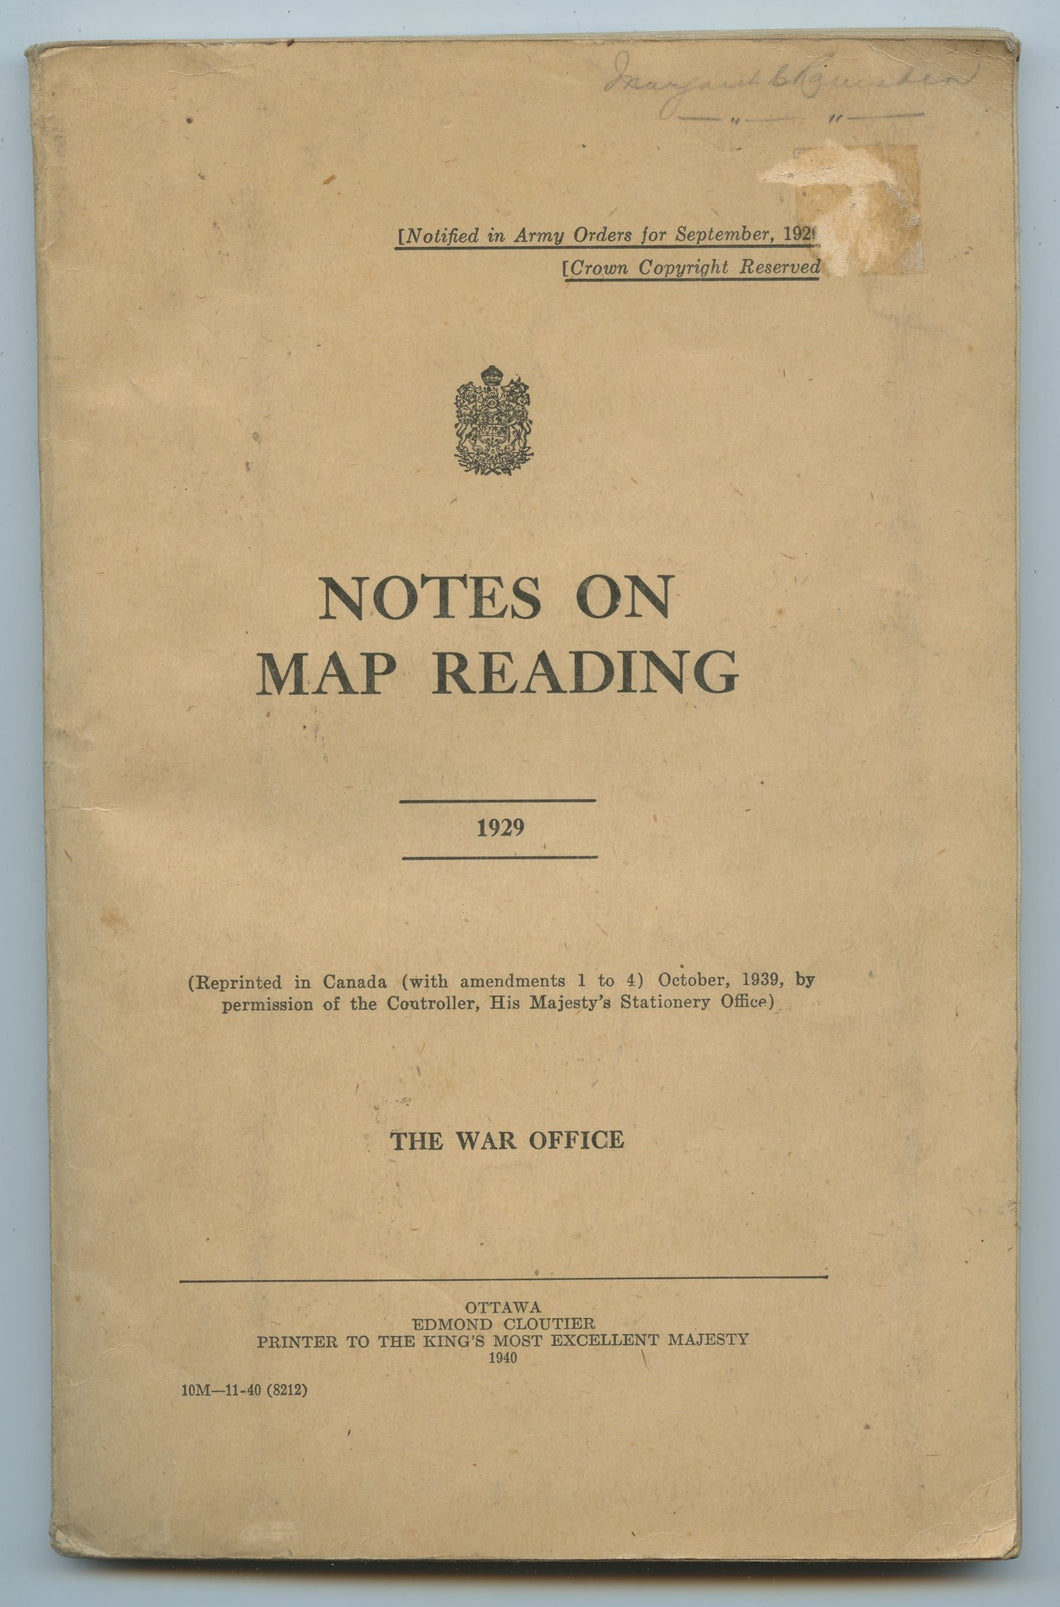 Notes on Map Reading, 1929